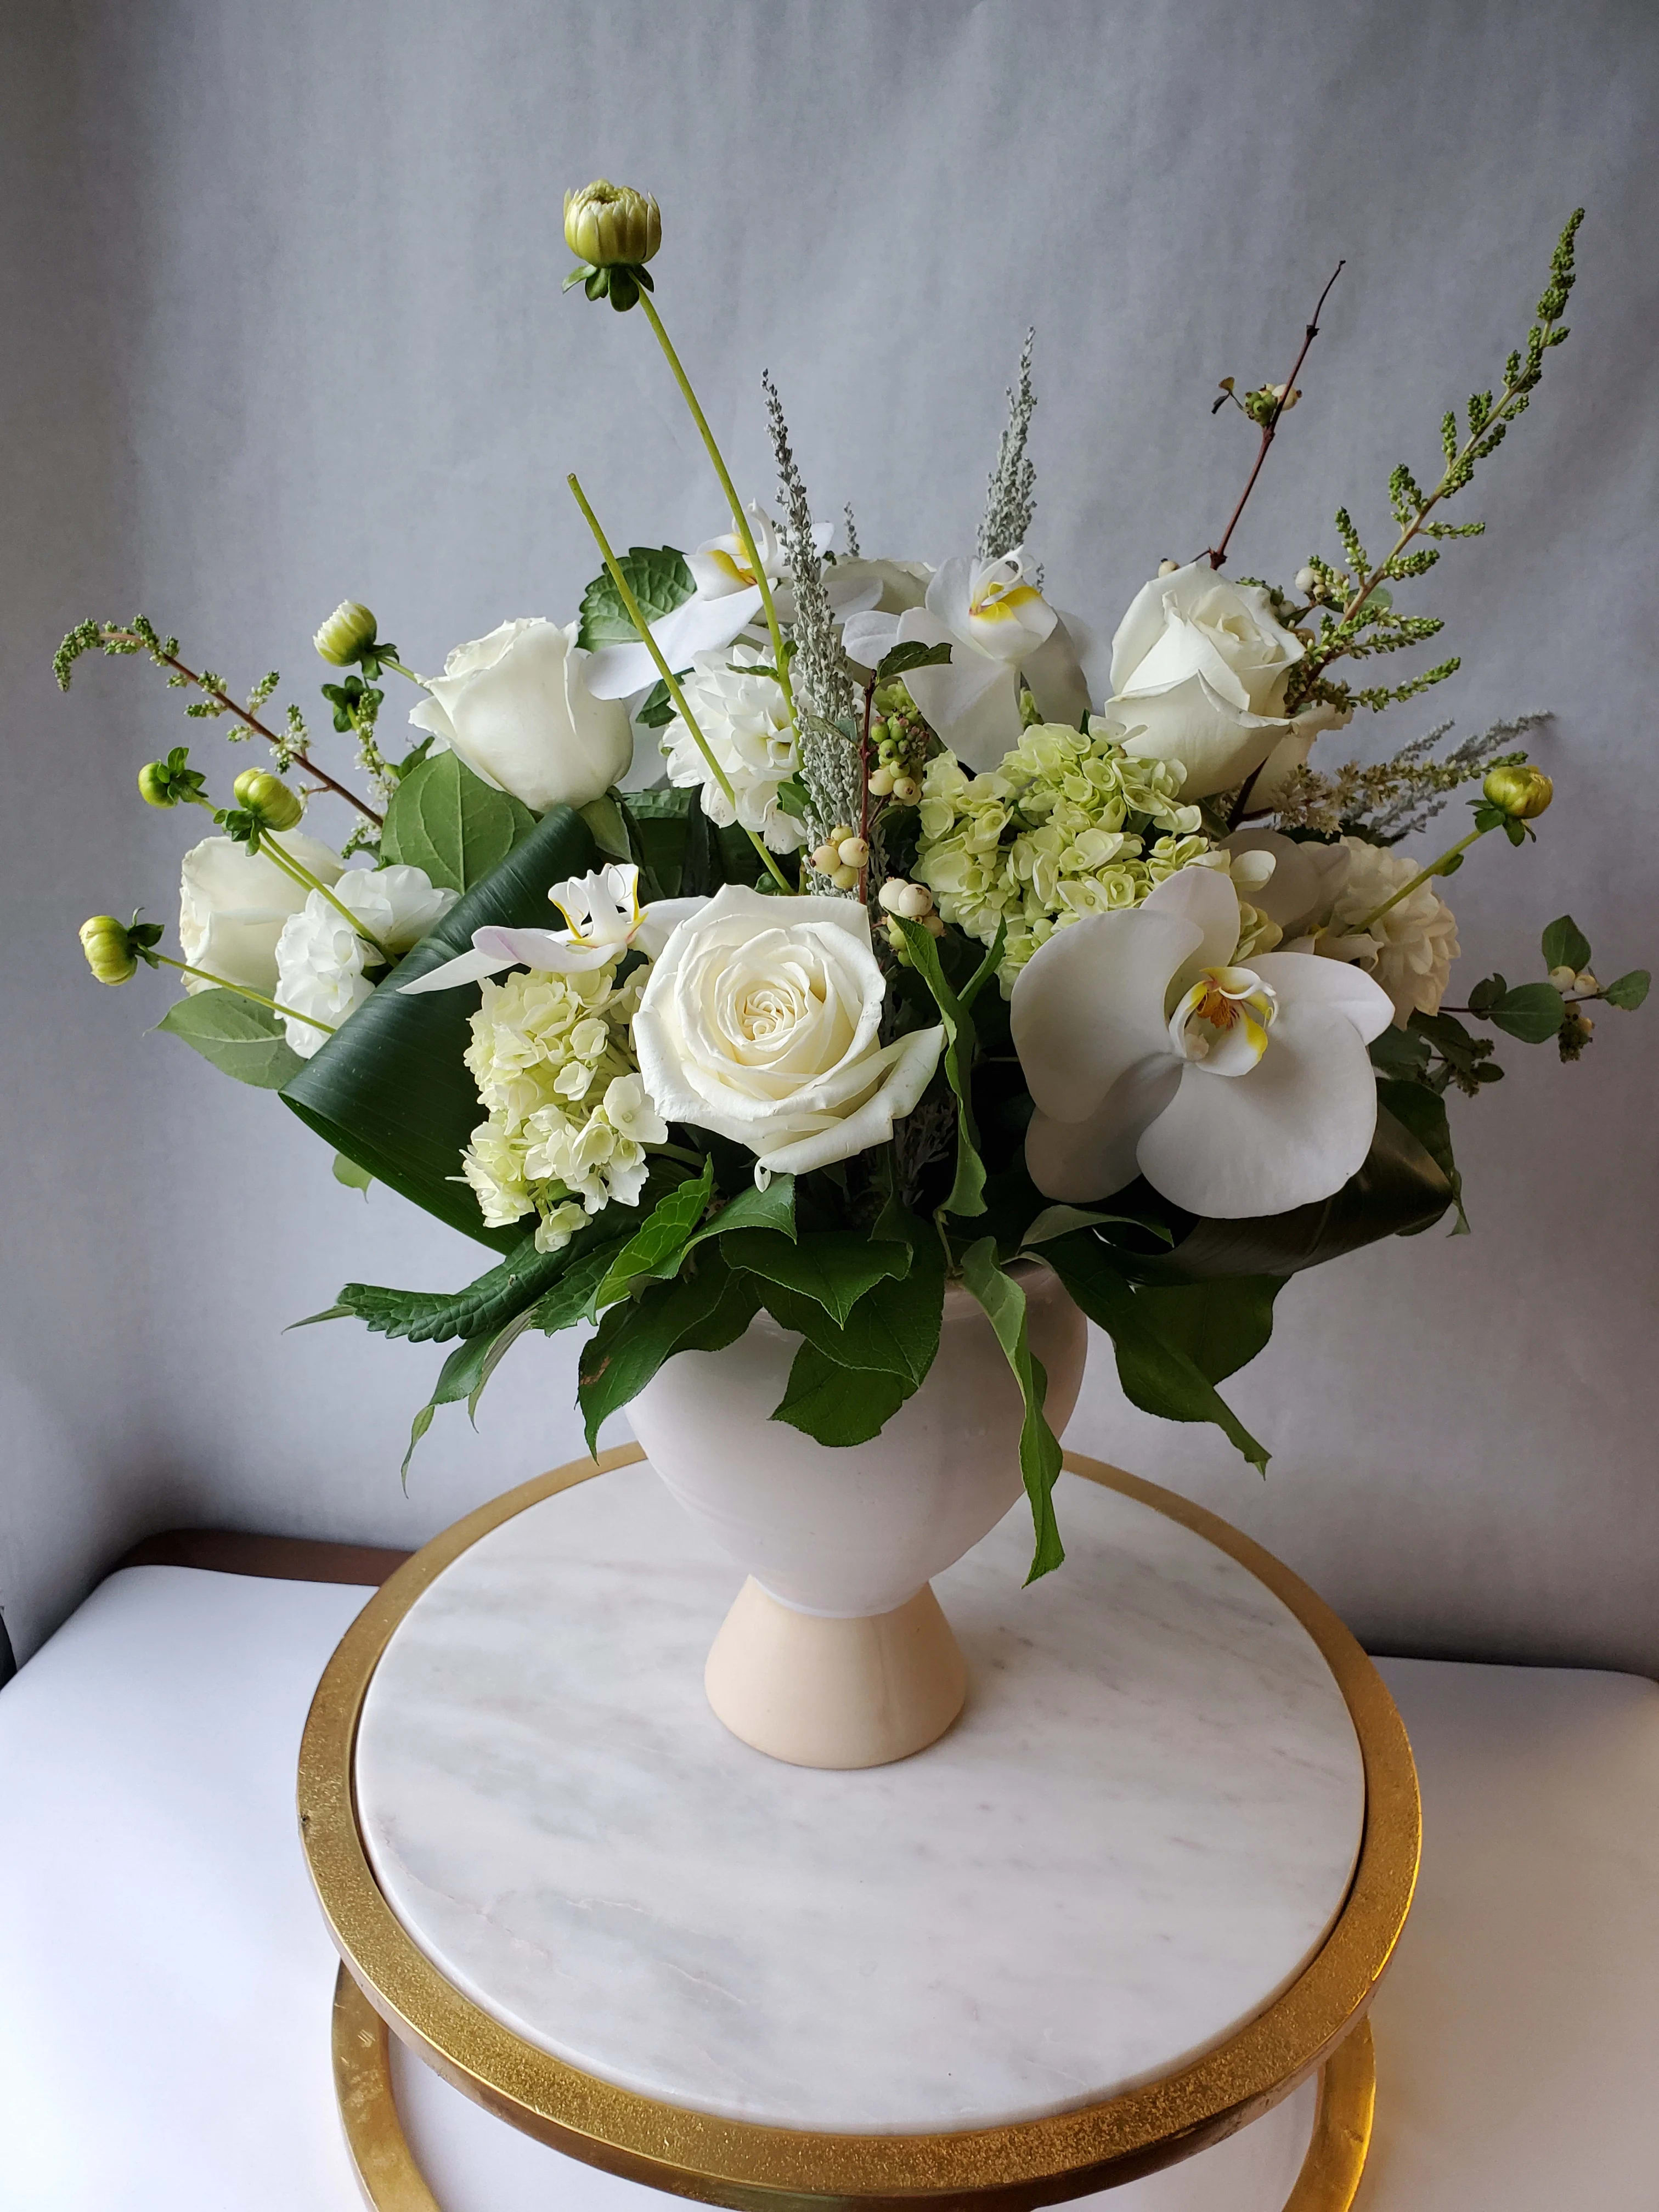 The Sophisticate - Tastefully compact this full-bodied arrangement lends an air of sophistication no matter the room in which it is placed.  With a timeless feel, this arrangement combines beautiful green and white tones to create a classic look.